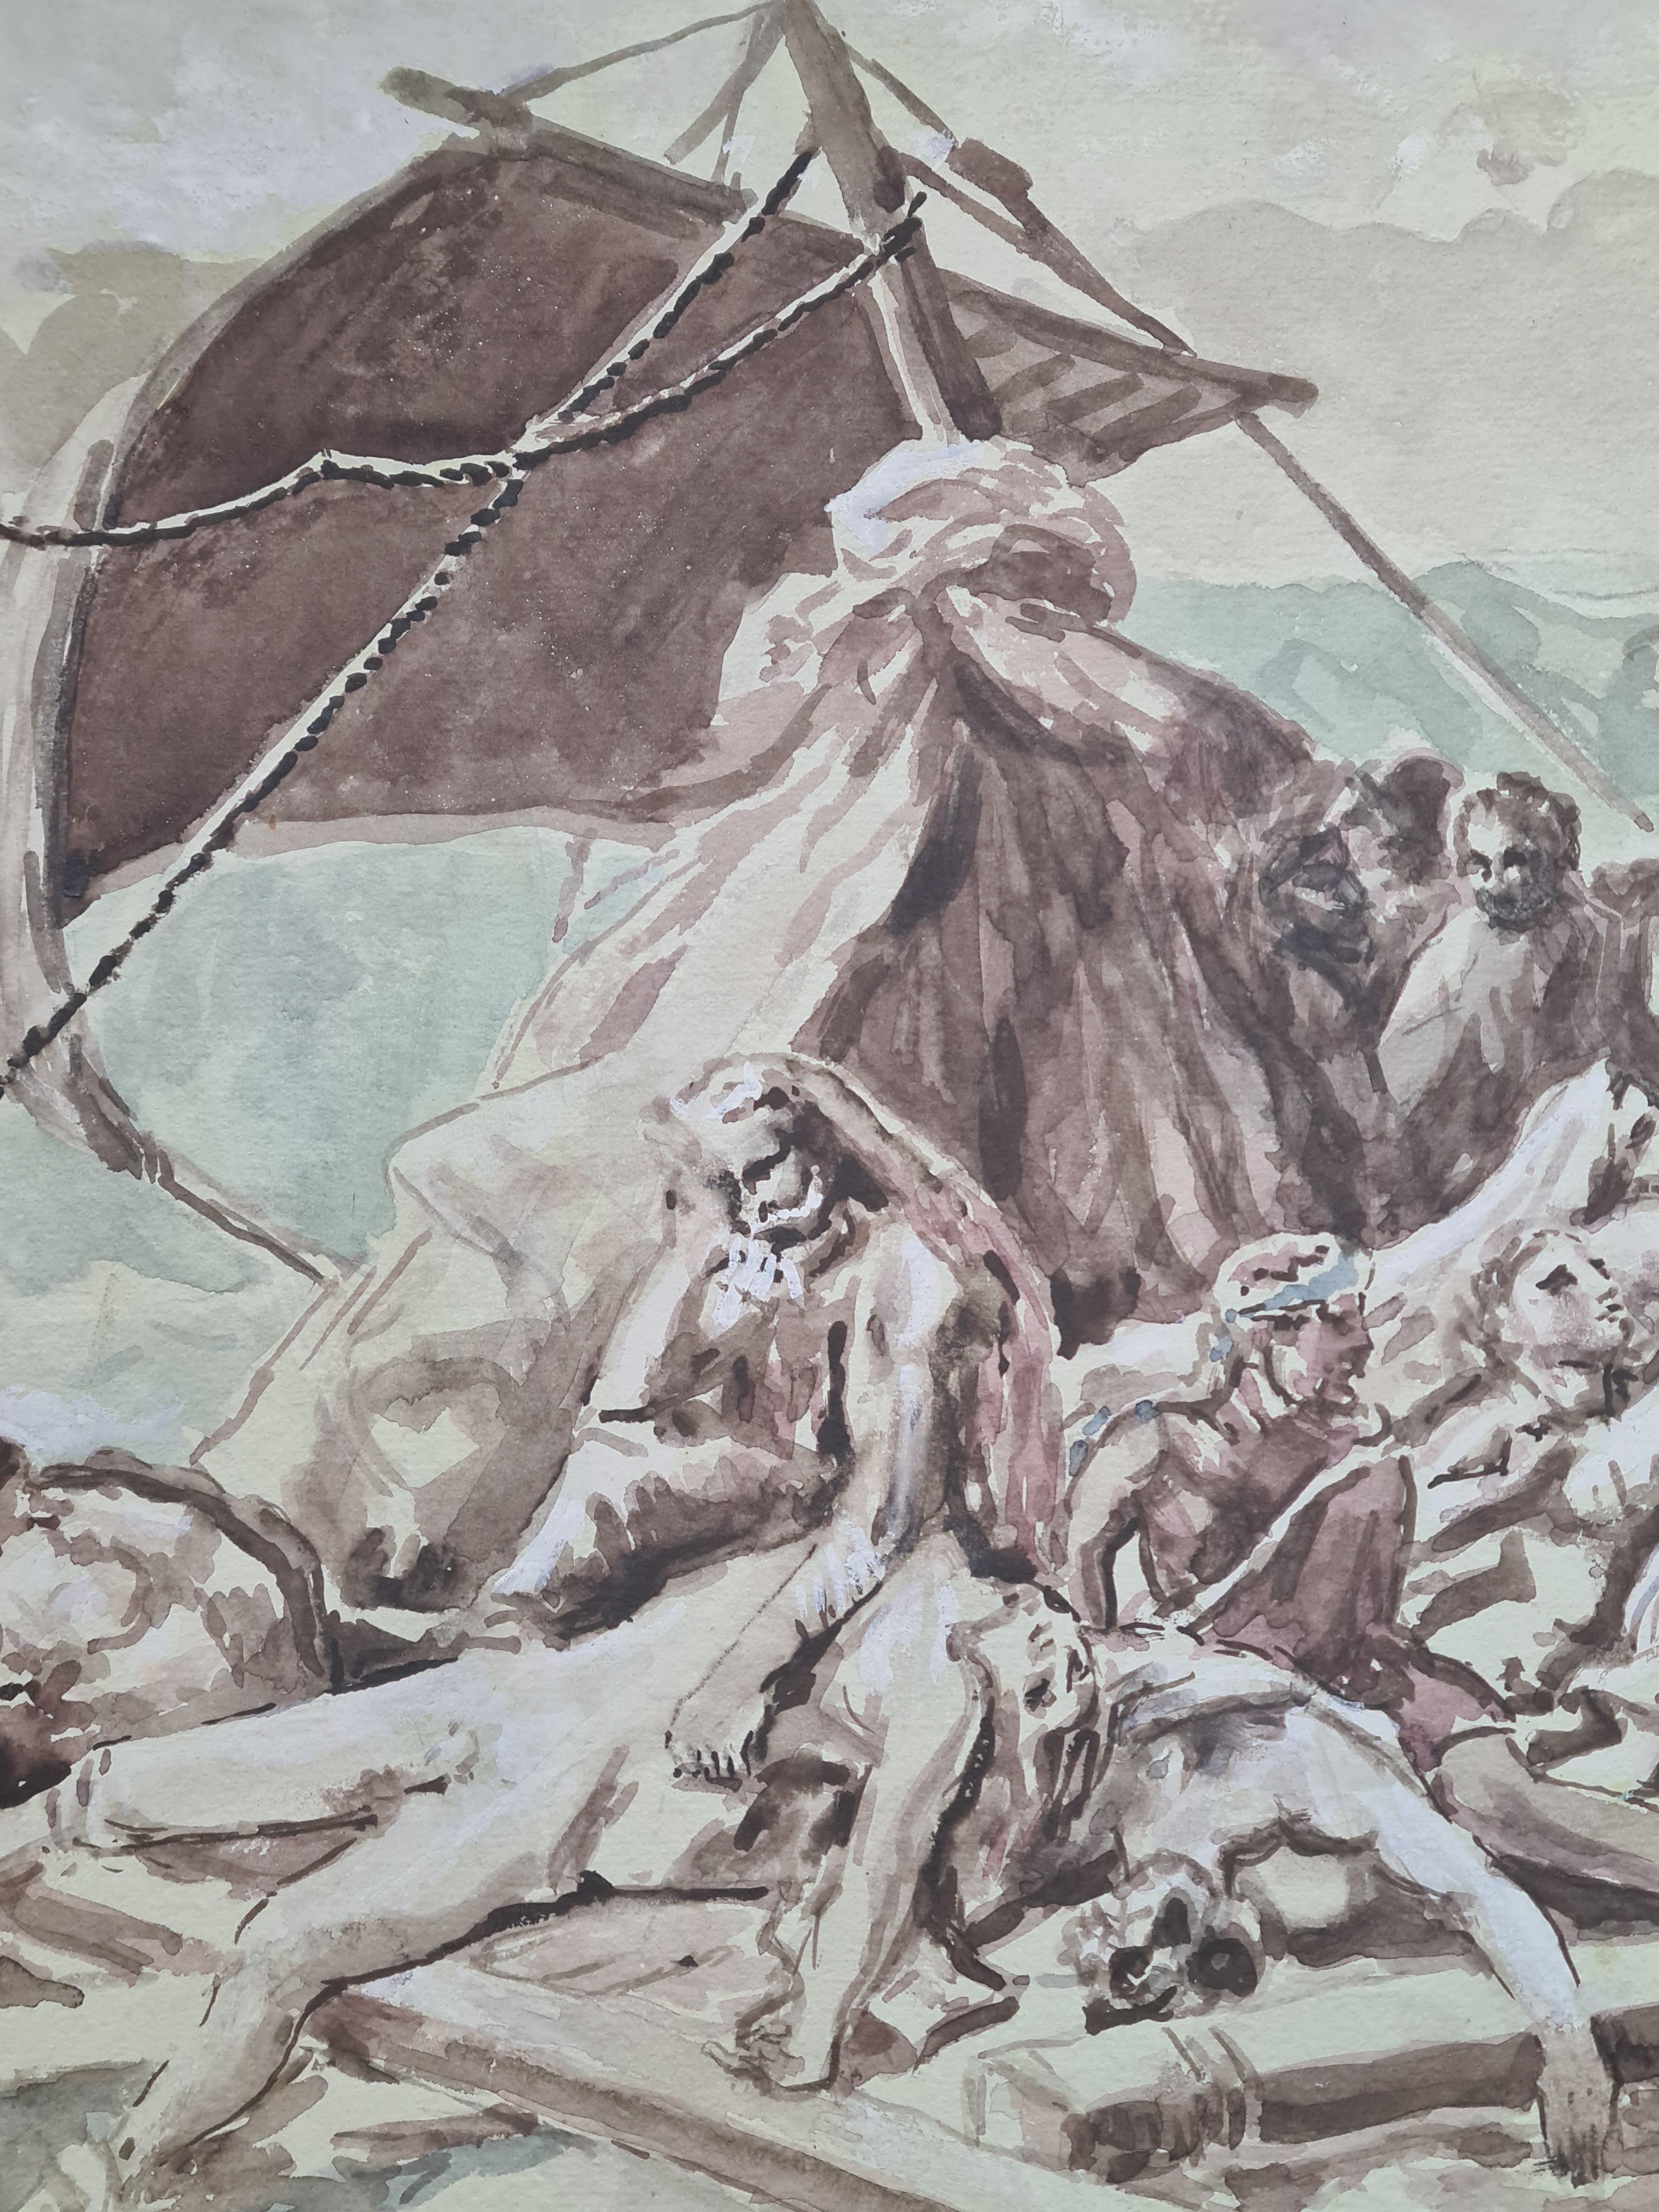 Watercolor Interpretation of the The Raft of the Medusa After Théodore Géricault - Romantic Art by Derek Carruthers